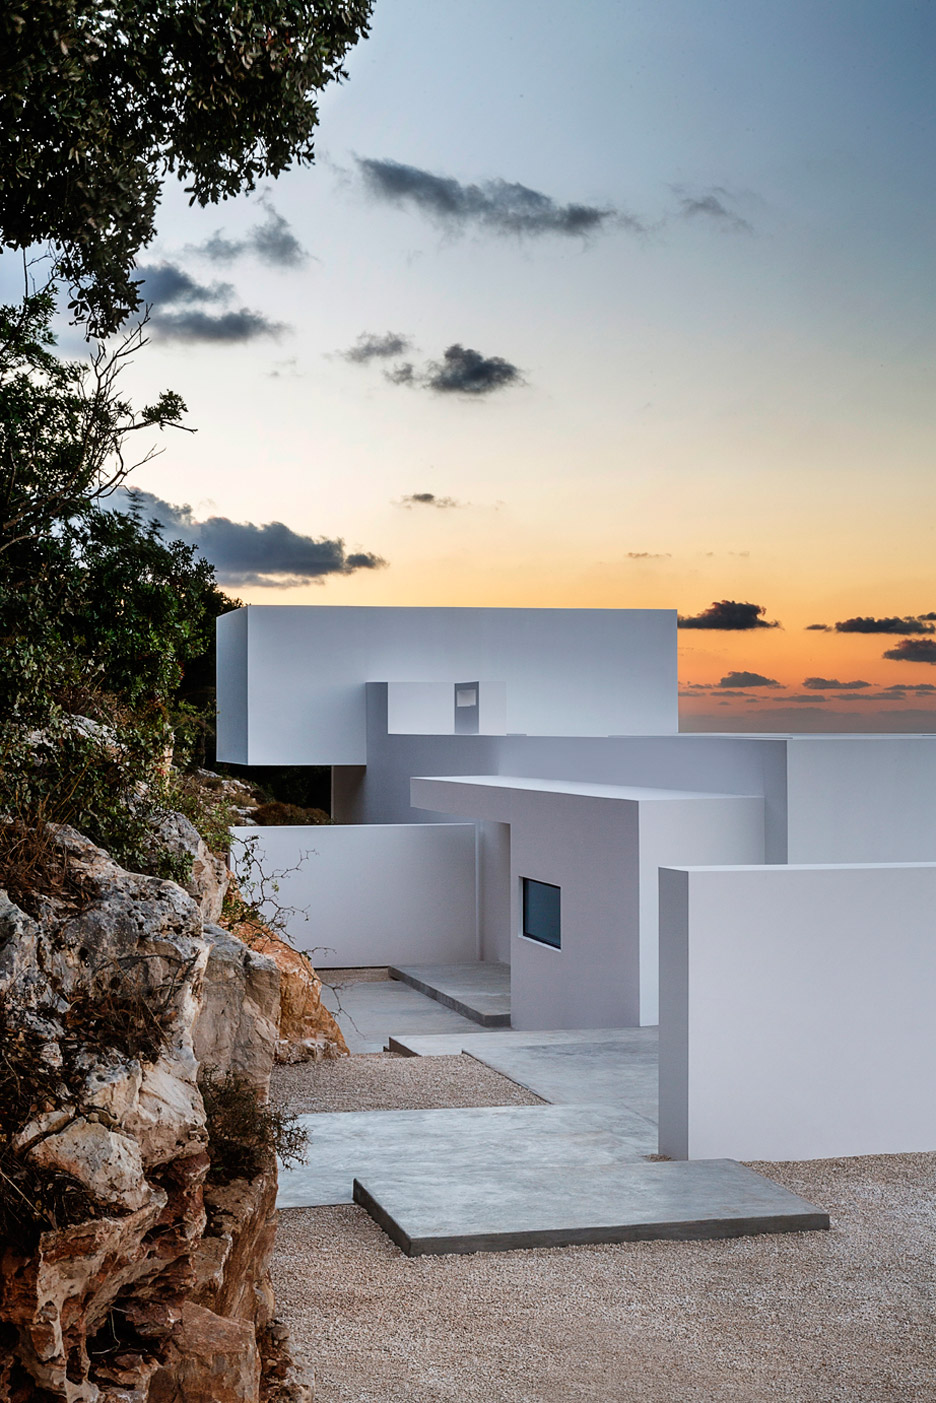 Silver House By Olivier Dwek Stands On The Forested Hillside Of The Greek Island Zante